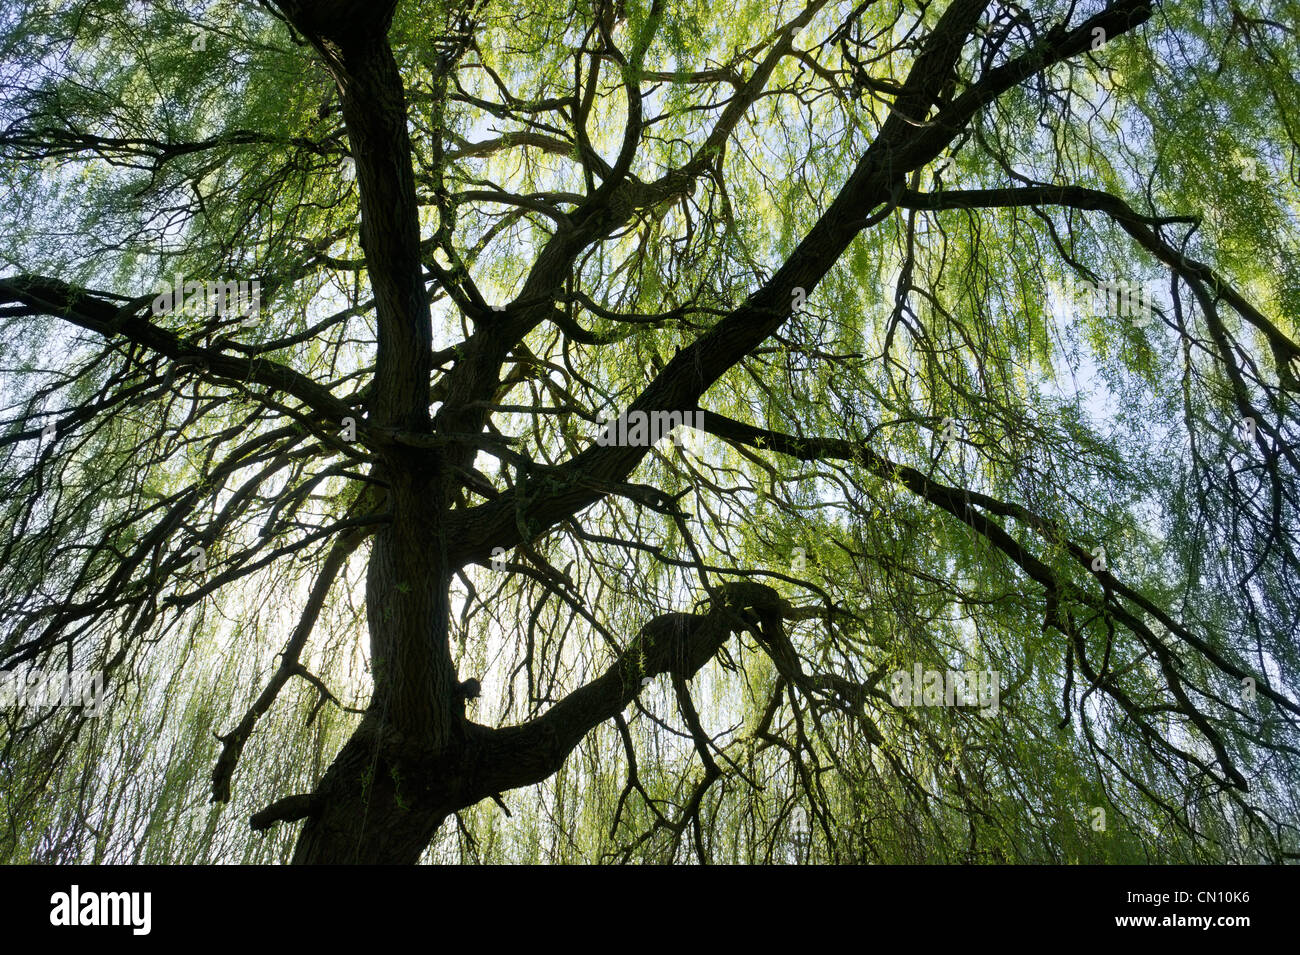 Silhouette Of Weeping Willow Tree Branches In Spring At Leavesden Stock Photo Alamy,What Does Poison Sumac Look Like On Your Arm